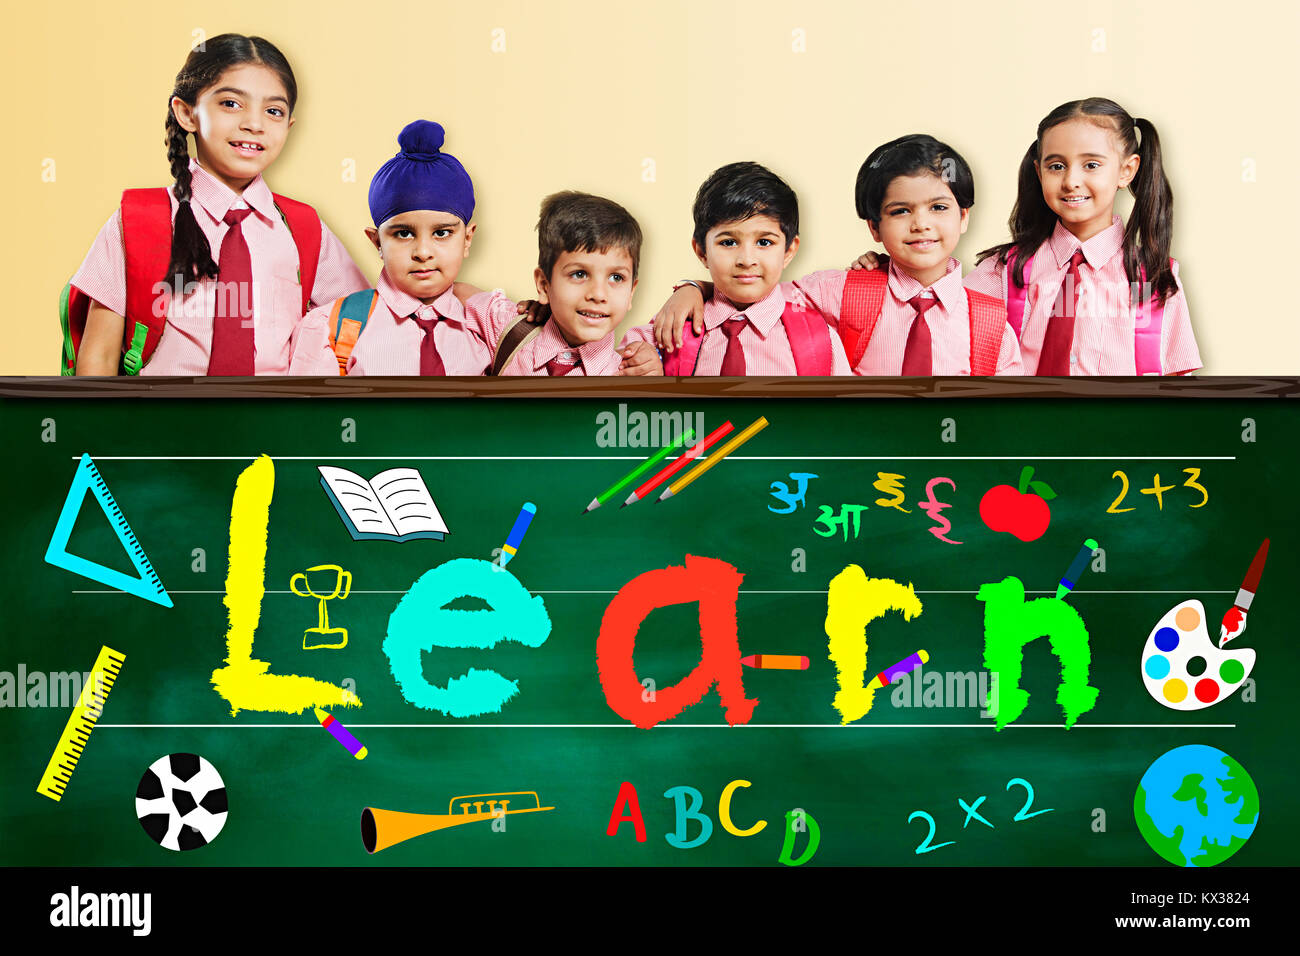 Group Indian School Childrens Students Friends Blackboard Education in Classroom Stock Photo